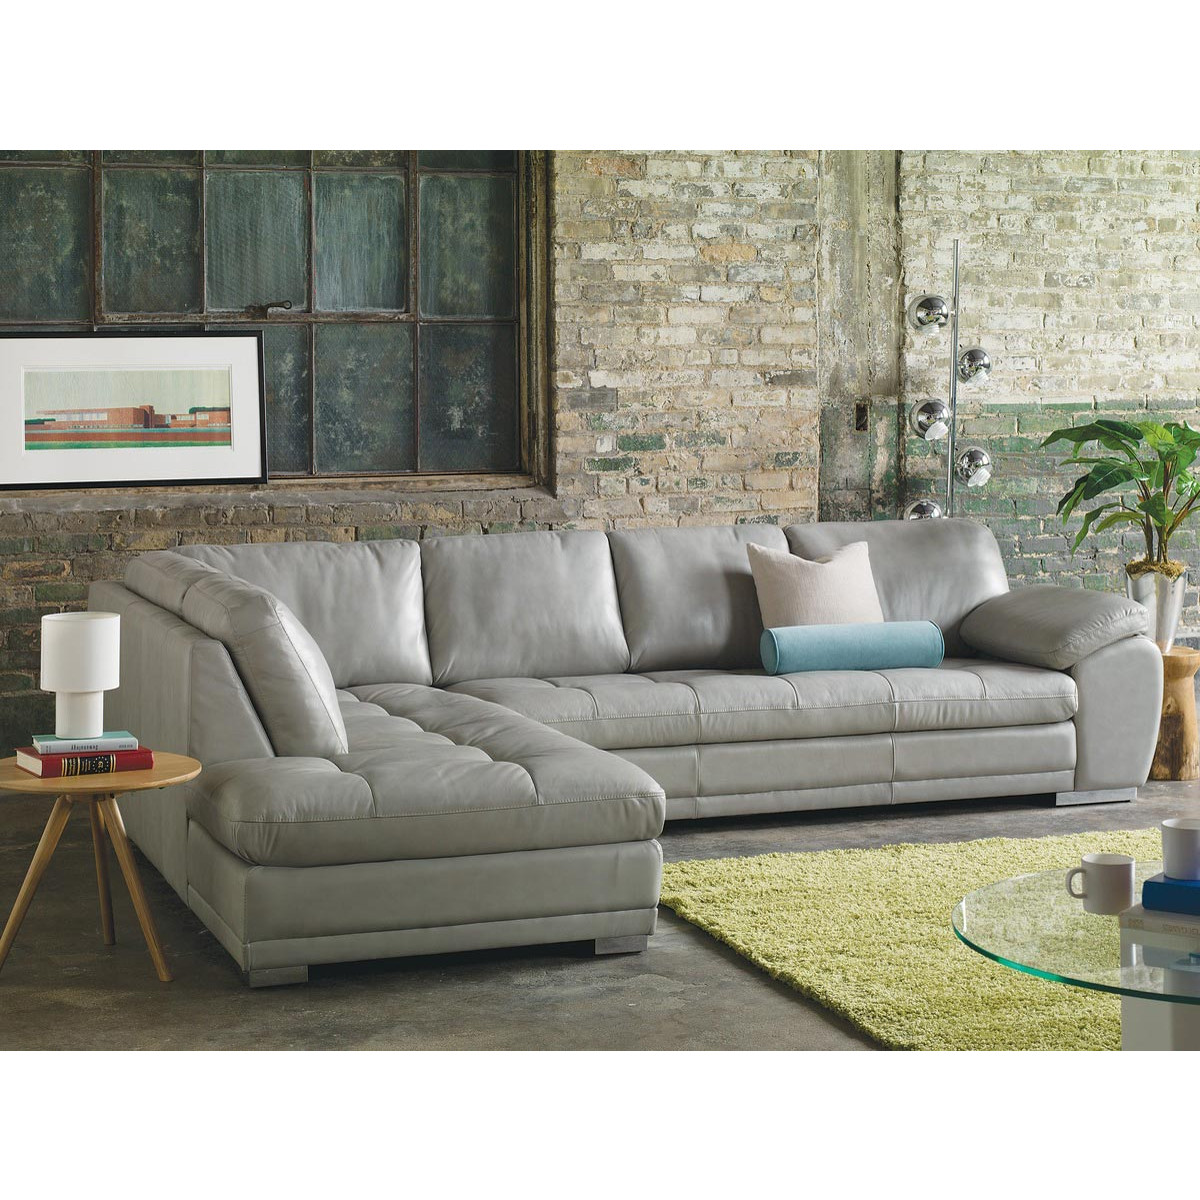 Palliser Miami Sectional From 1 968 00, Leather Sectionals Miami